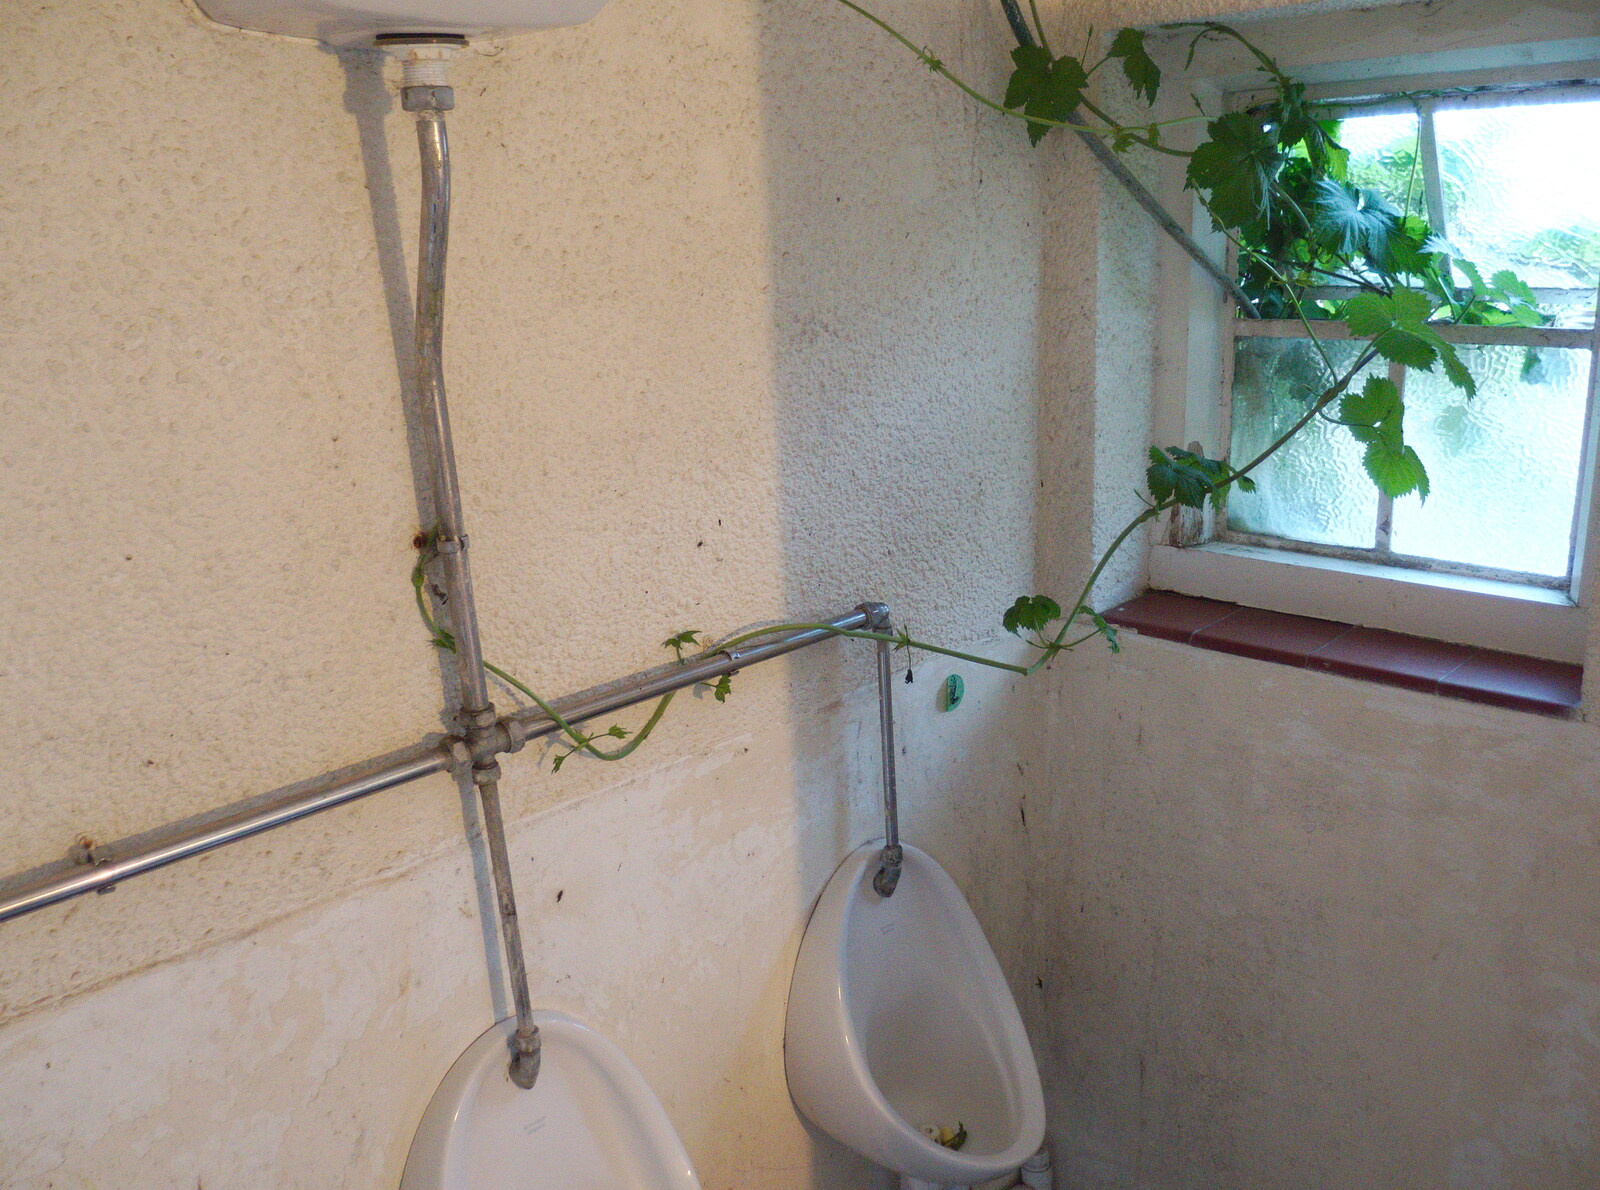 A vine bids to take over for the gents urinals from The BSCC at the Victoria, Earl Soham, Suffolk - 5th June 2014